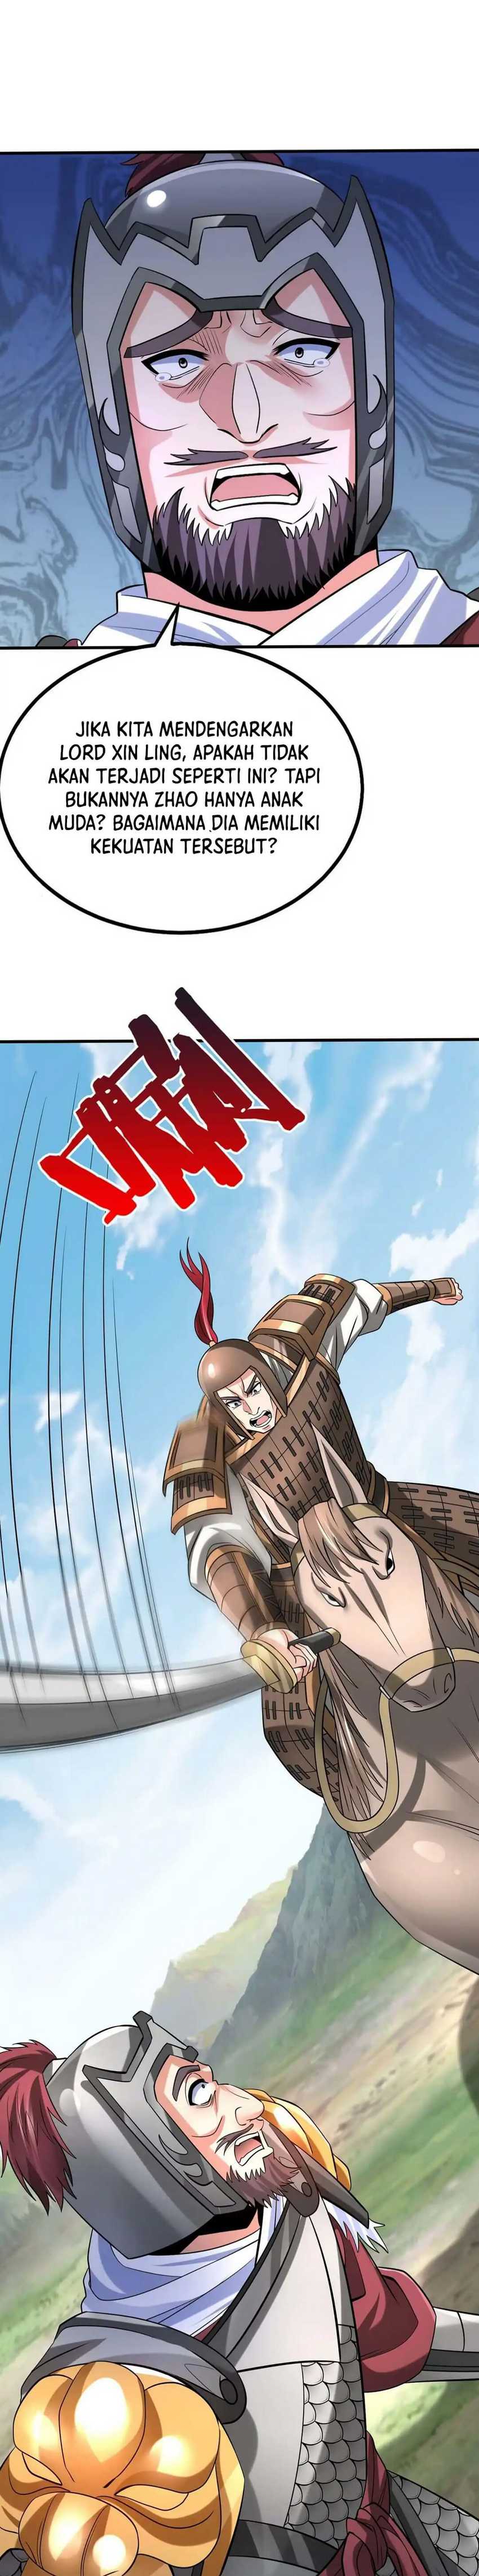 The Son Of The First Emperor Kills Enemies And Becomes A God Chapter 60 Image 13